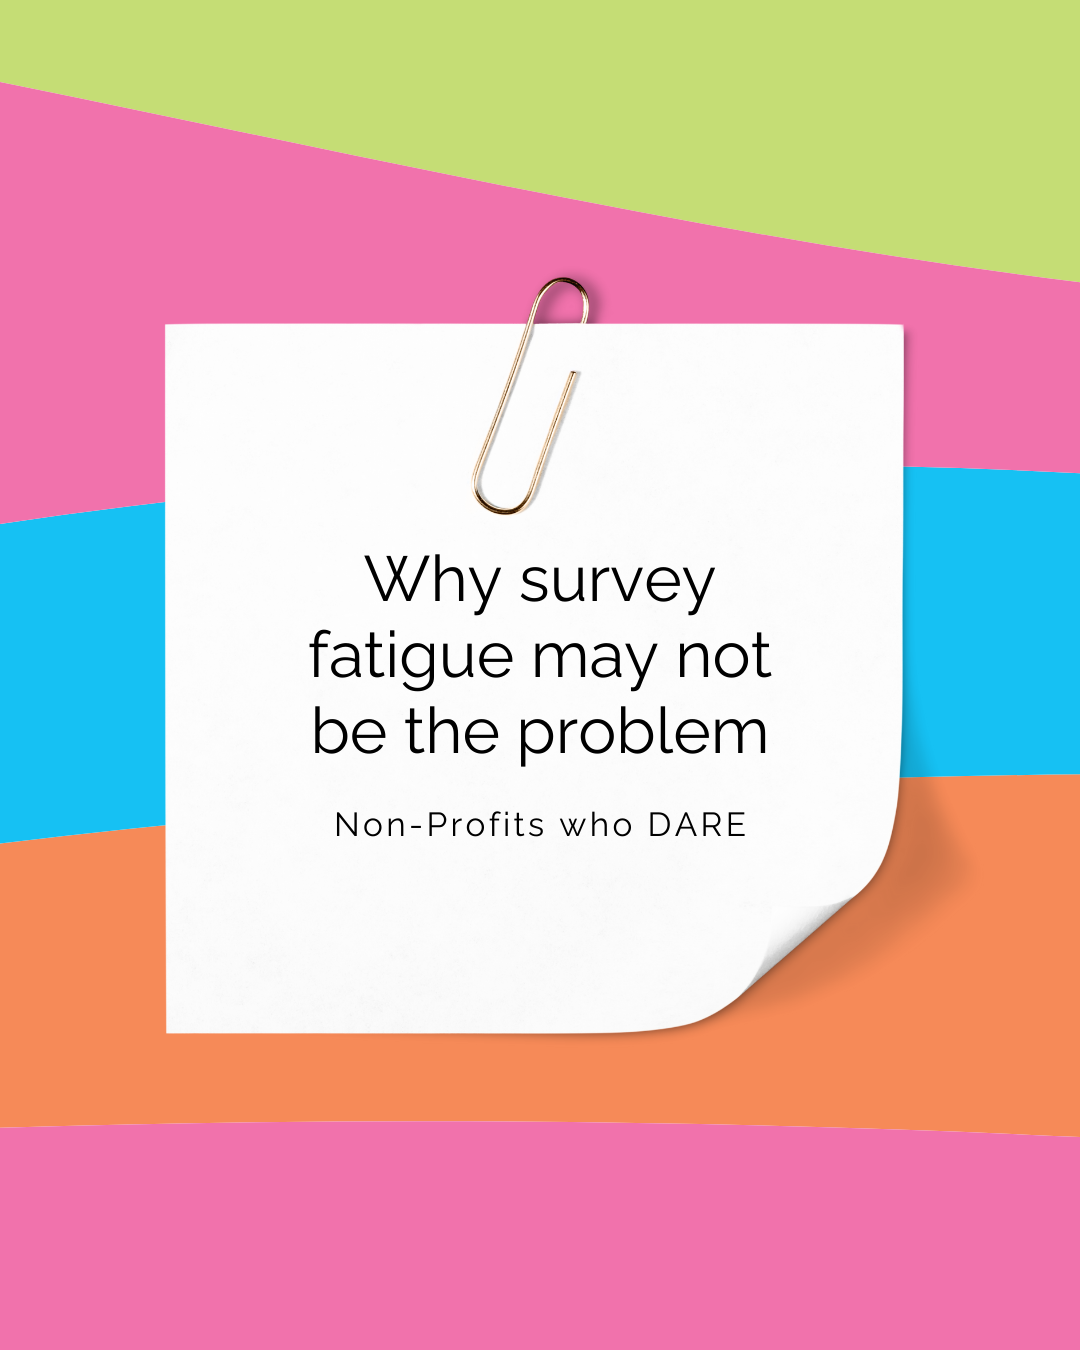 Why survey fatigue may not be the problem